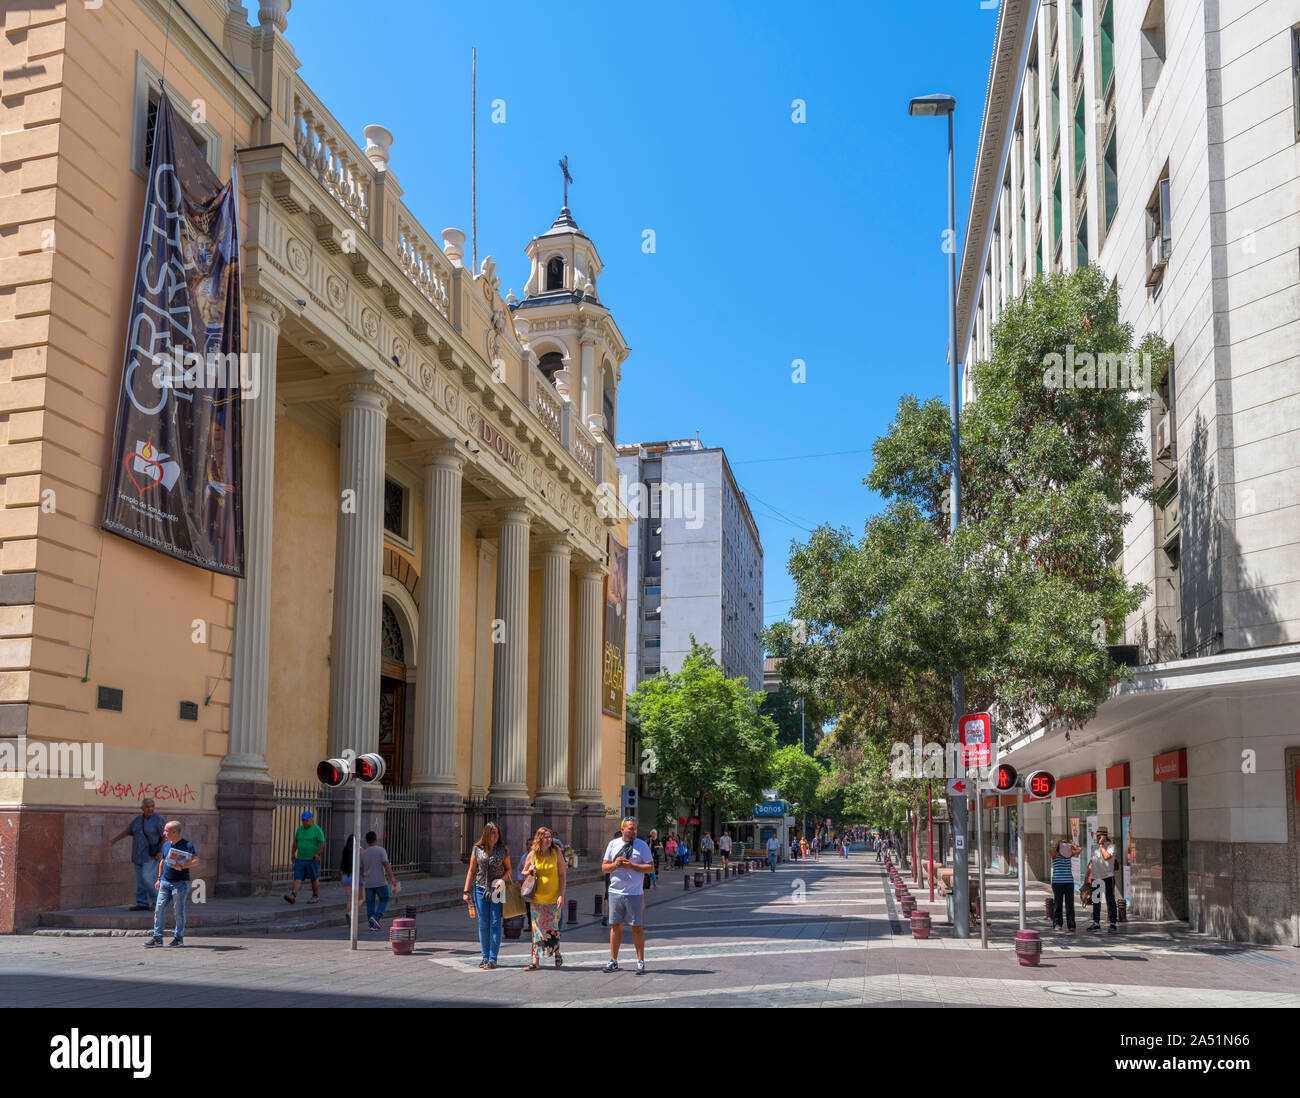 The early 17th century Iglesia de San Agustín (Church of St Augustine), in downtown Santiago, Chile, South America Stock Photo